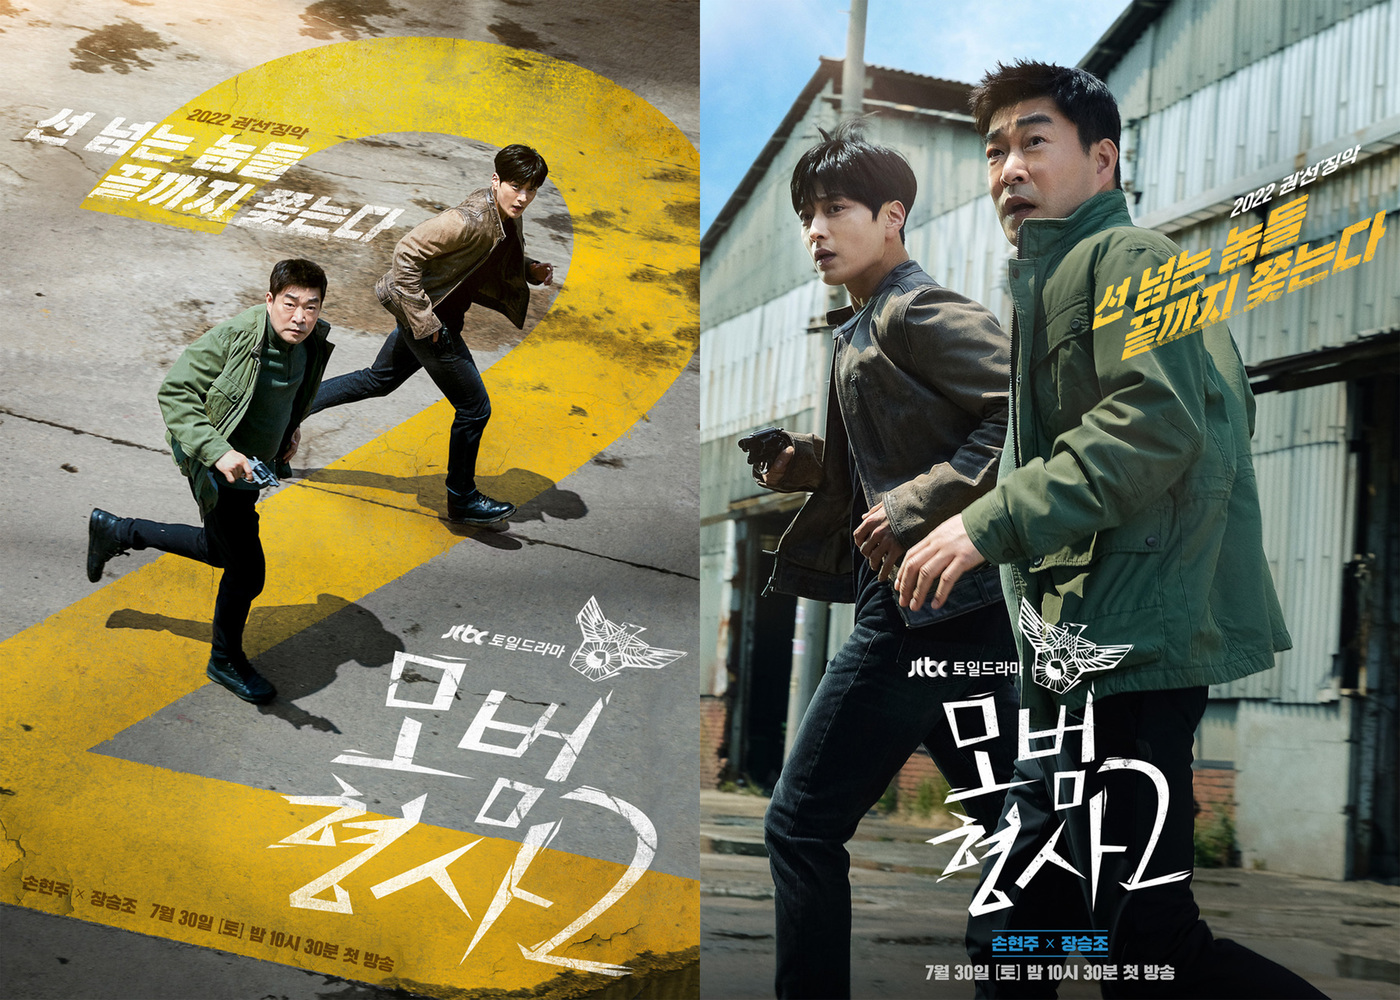 Fighting crime with Sohn Hyun-joo and Jang Seung-jo in The Good Detective 2